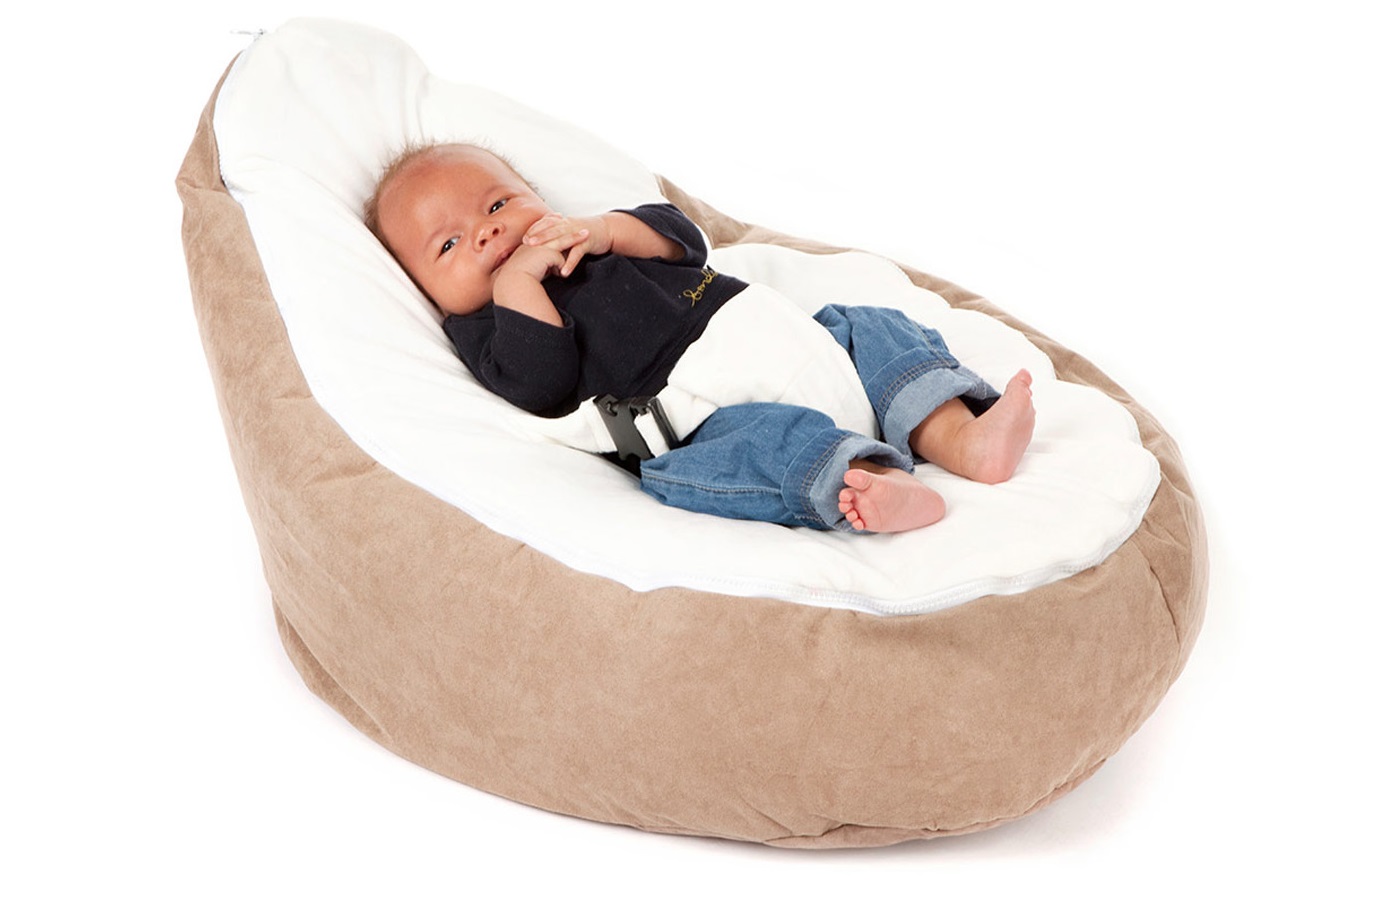 What to consider when buying a baby sleeping bean bag chair